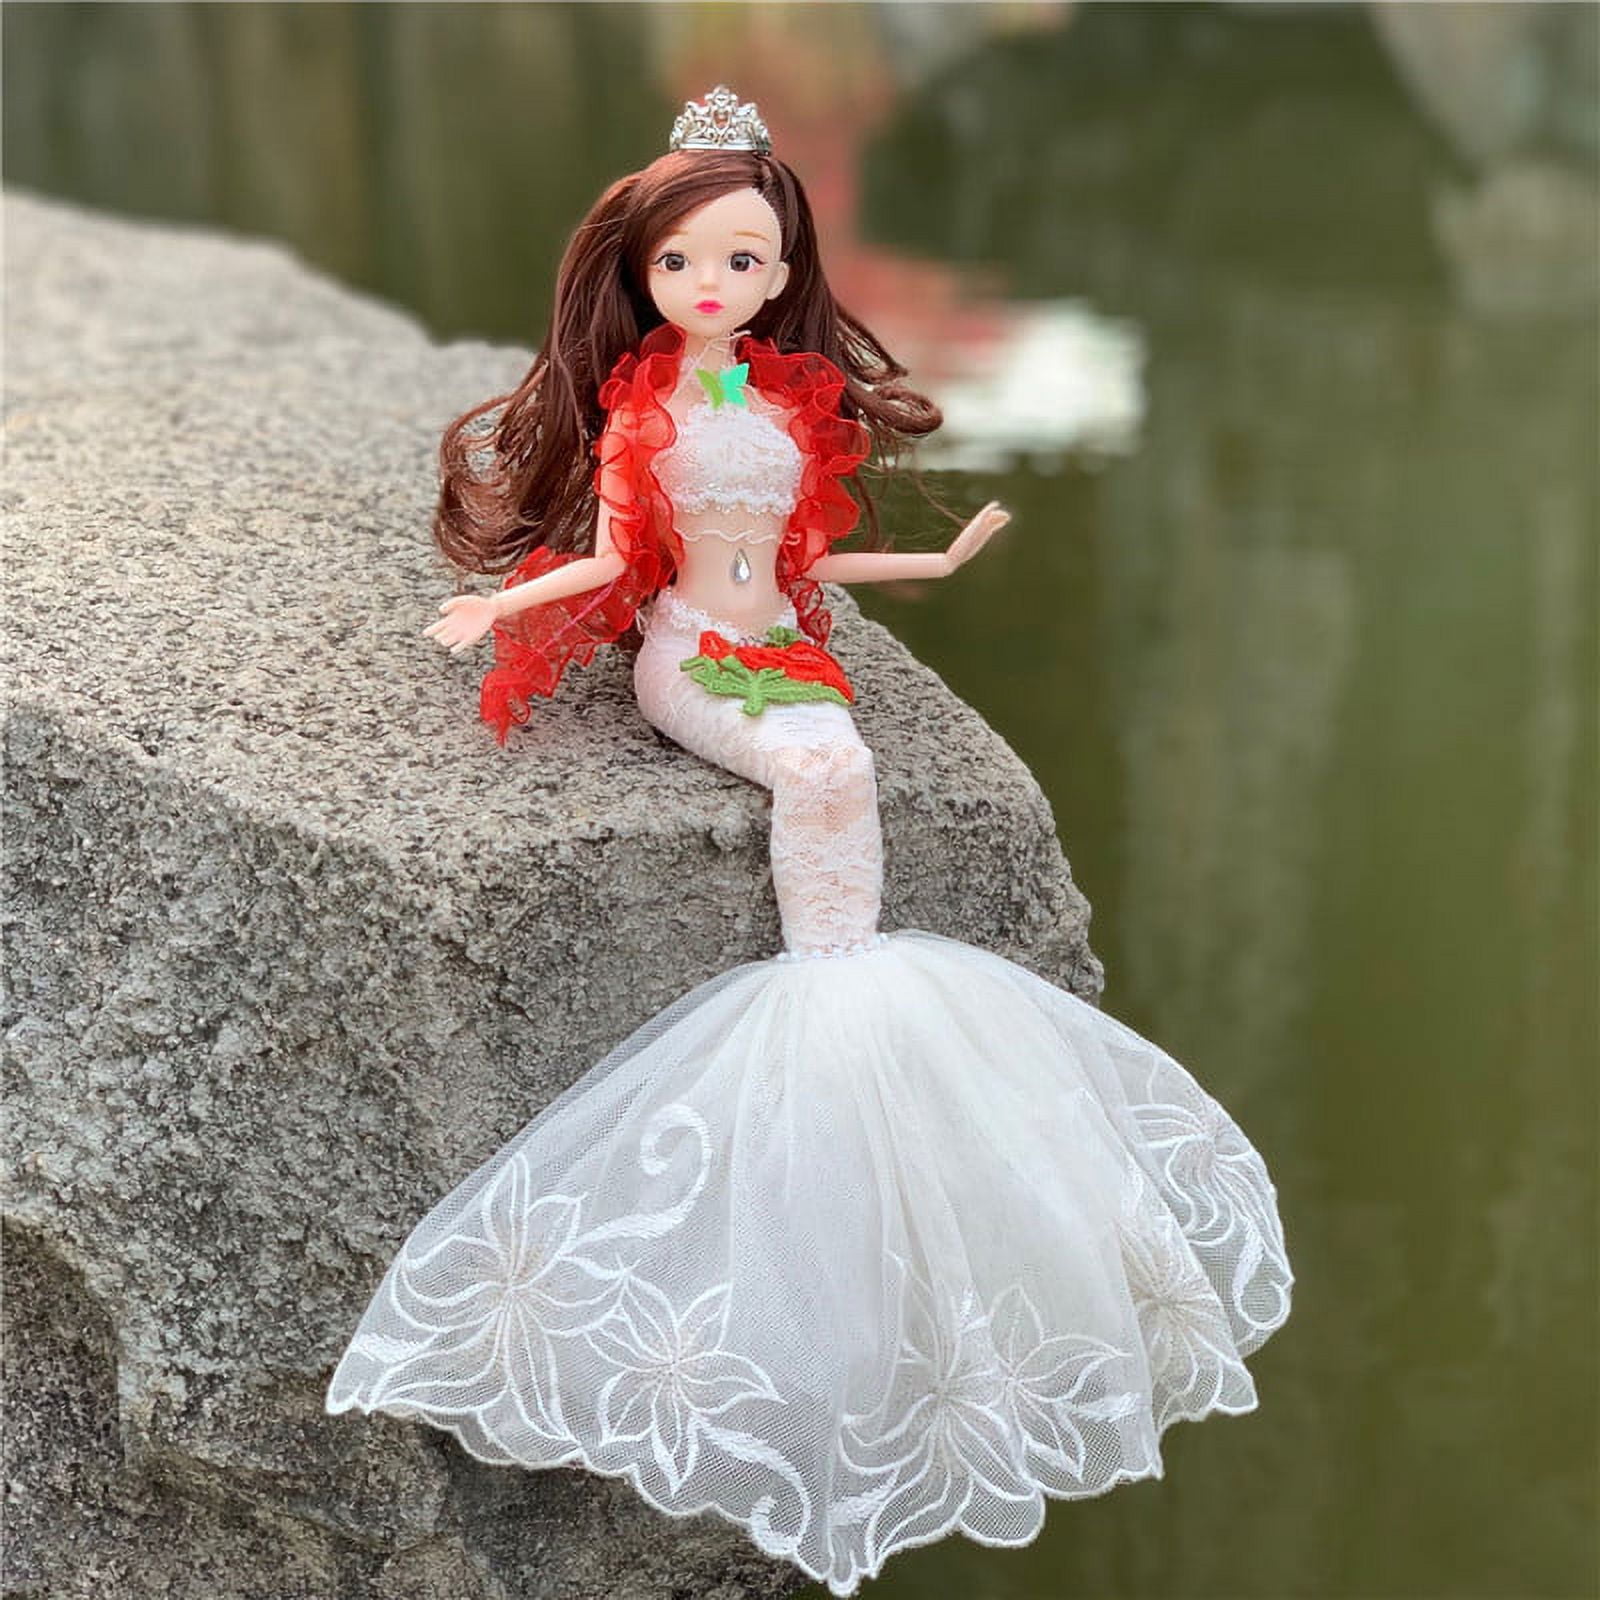 Mermaid Toys For Girls DIY Girl Doll Dress Up Toys Posable With Sequin  Fishtail Skirt Birthday Gifts For Girls Over 3 Years - AliExpress